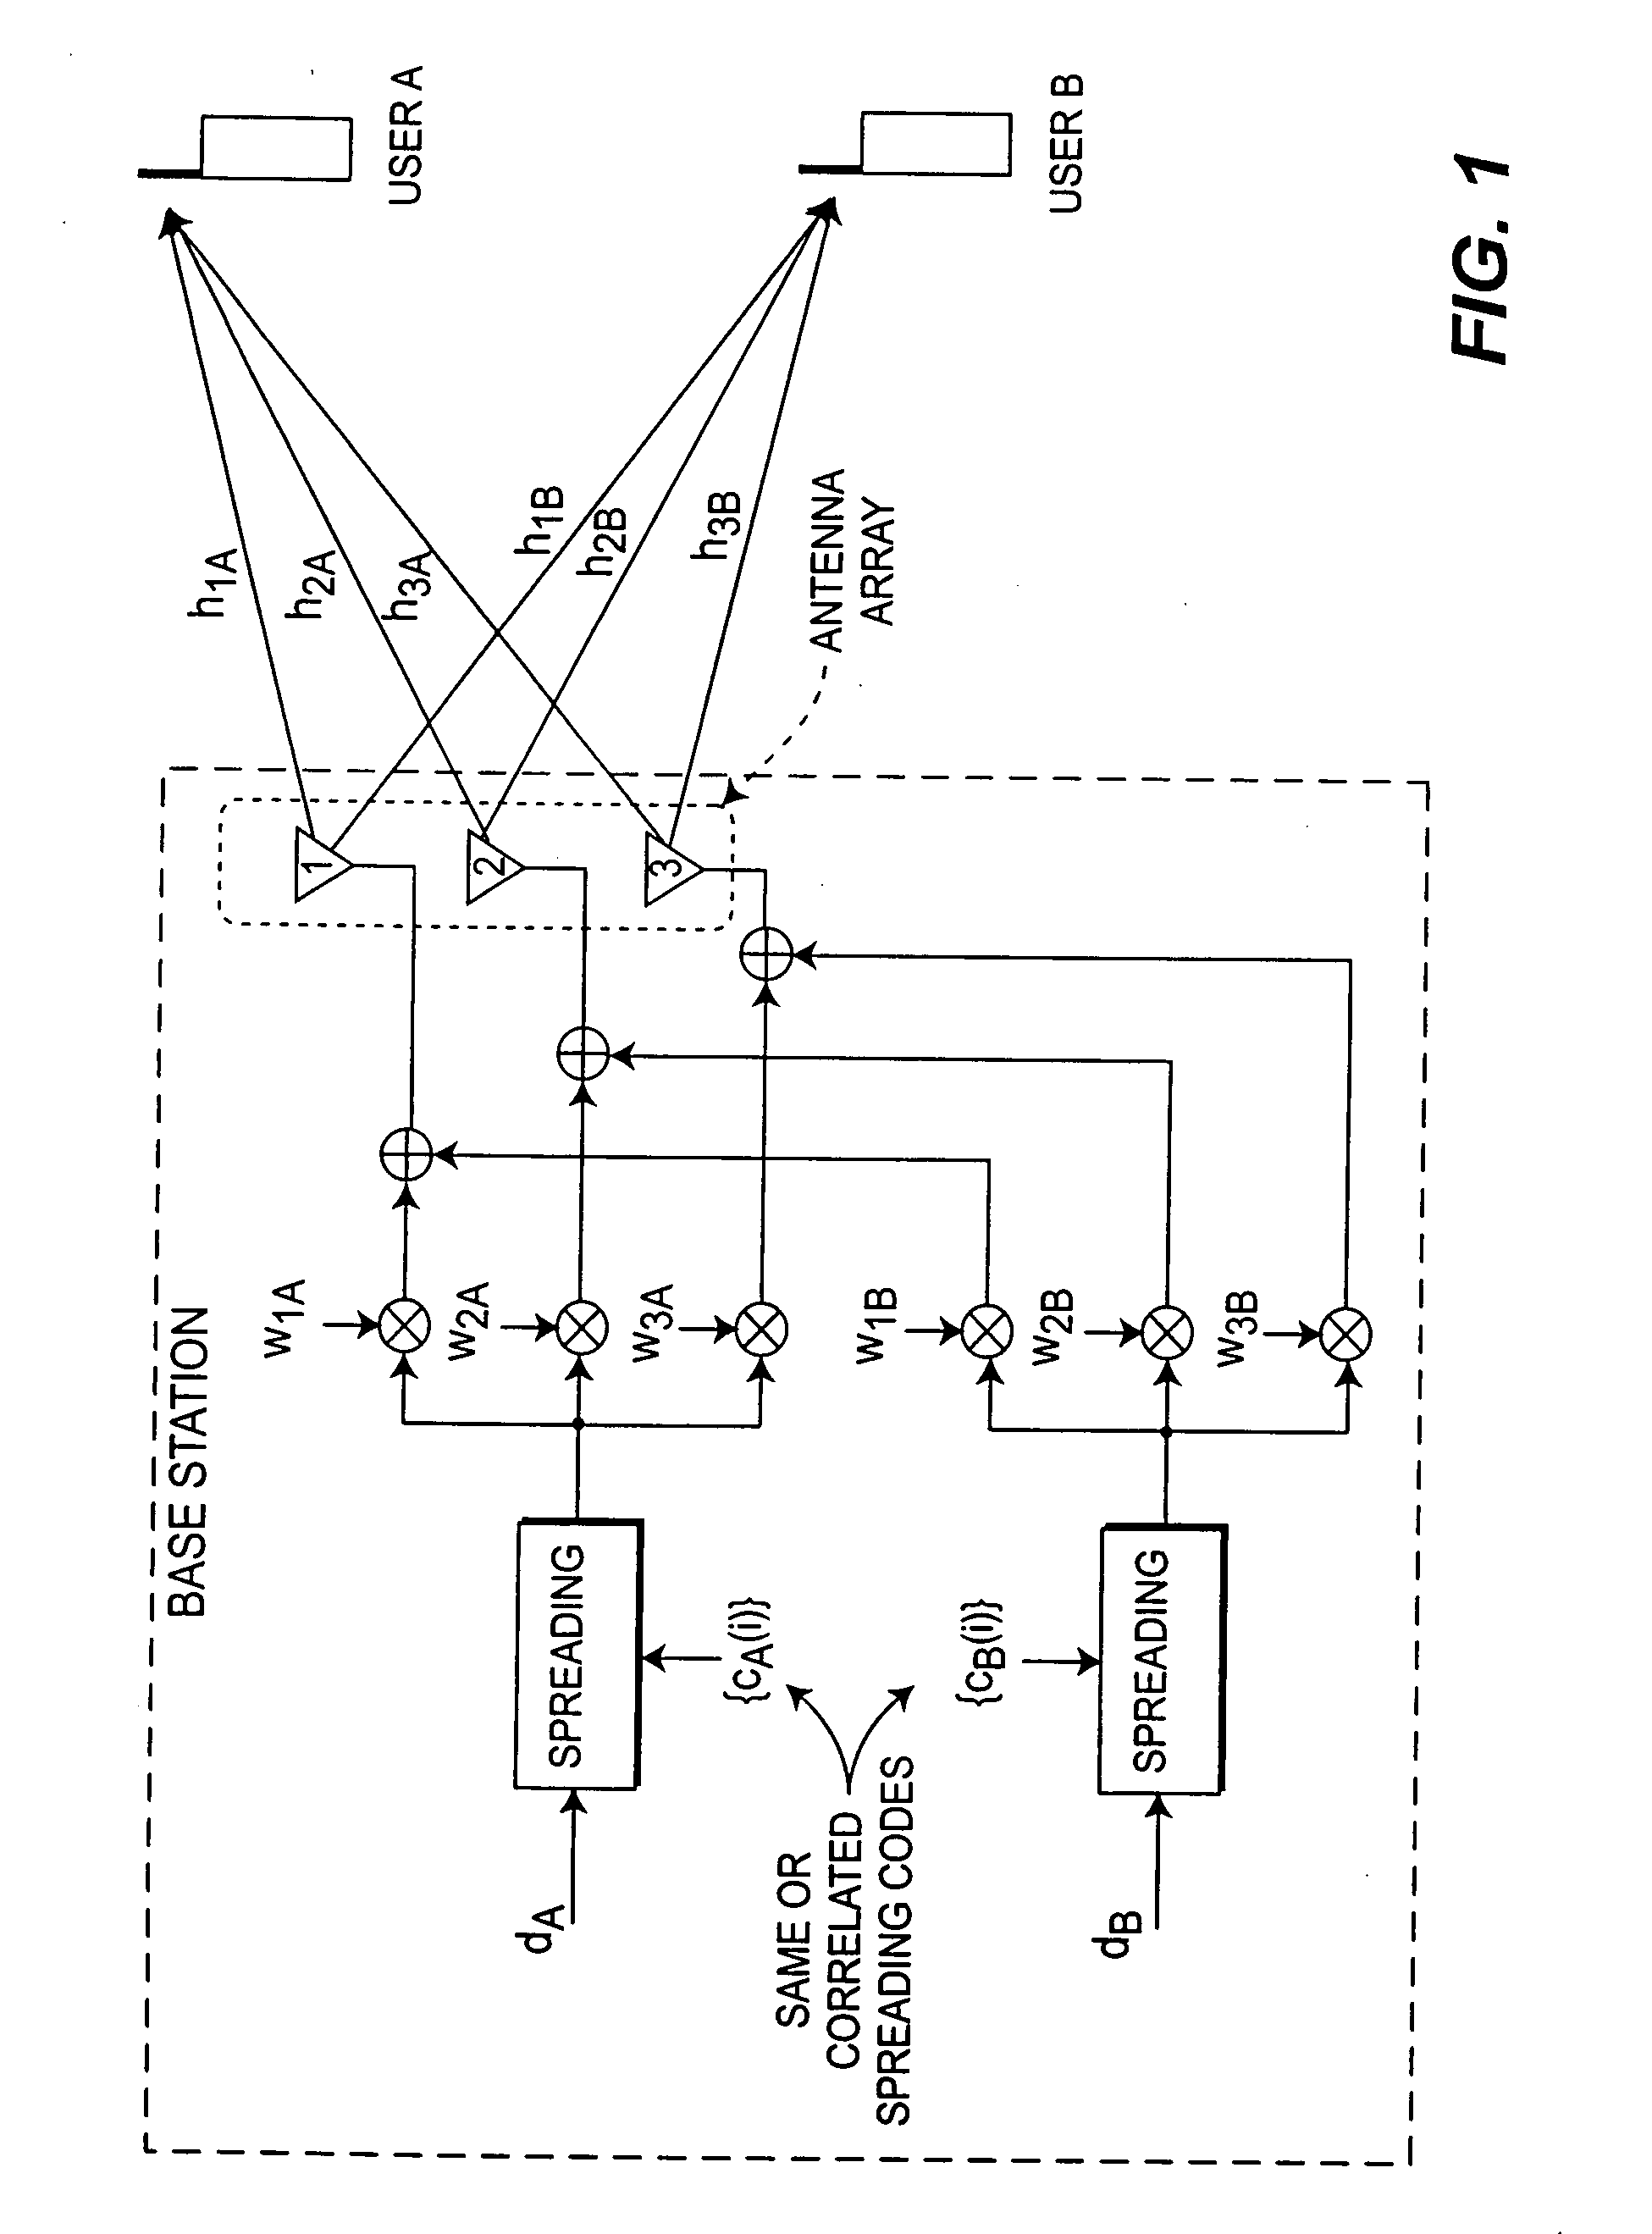 Method and system for code reuse and capacity enhancement using null steering